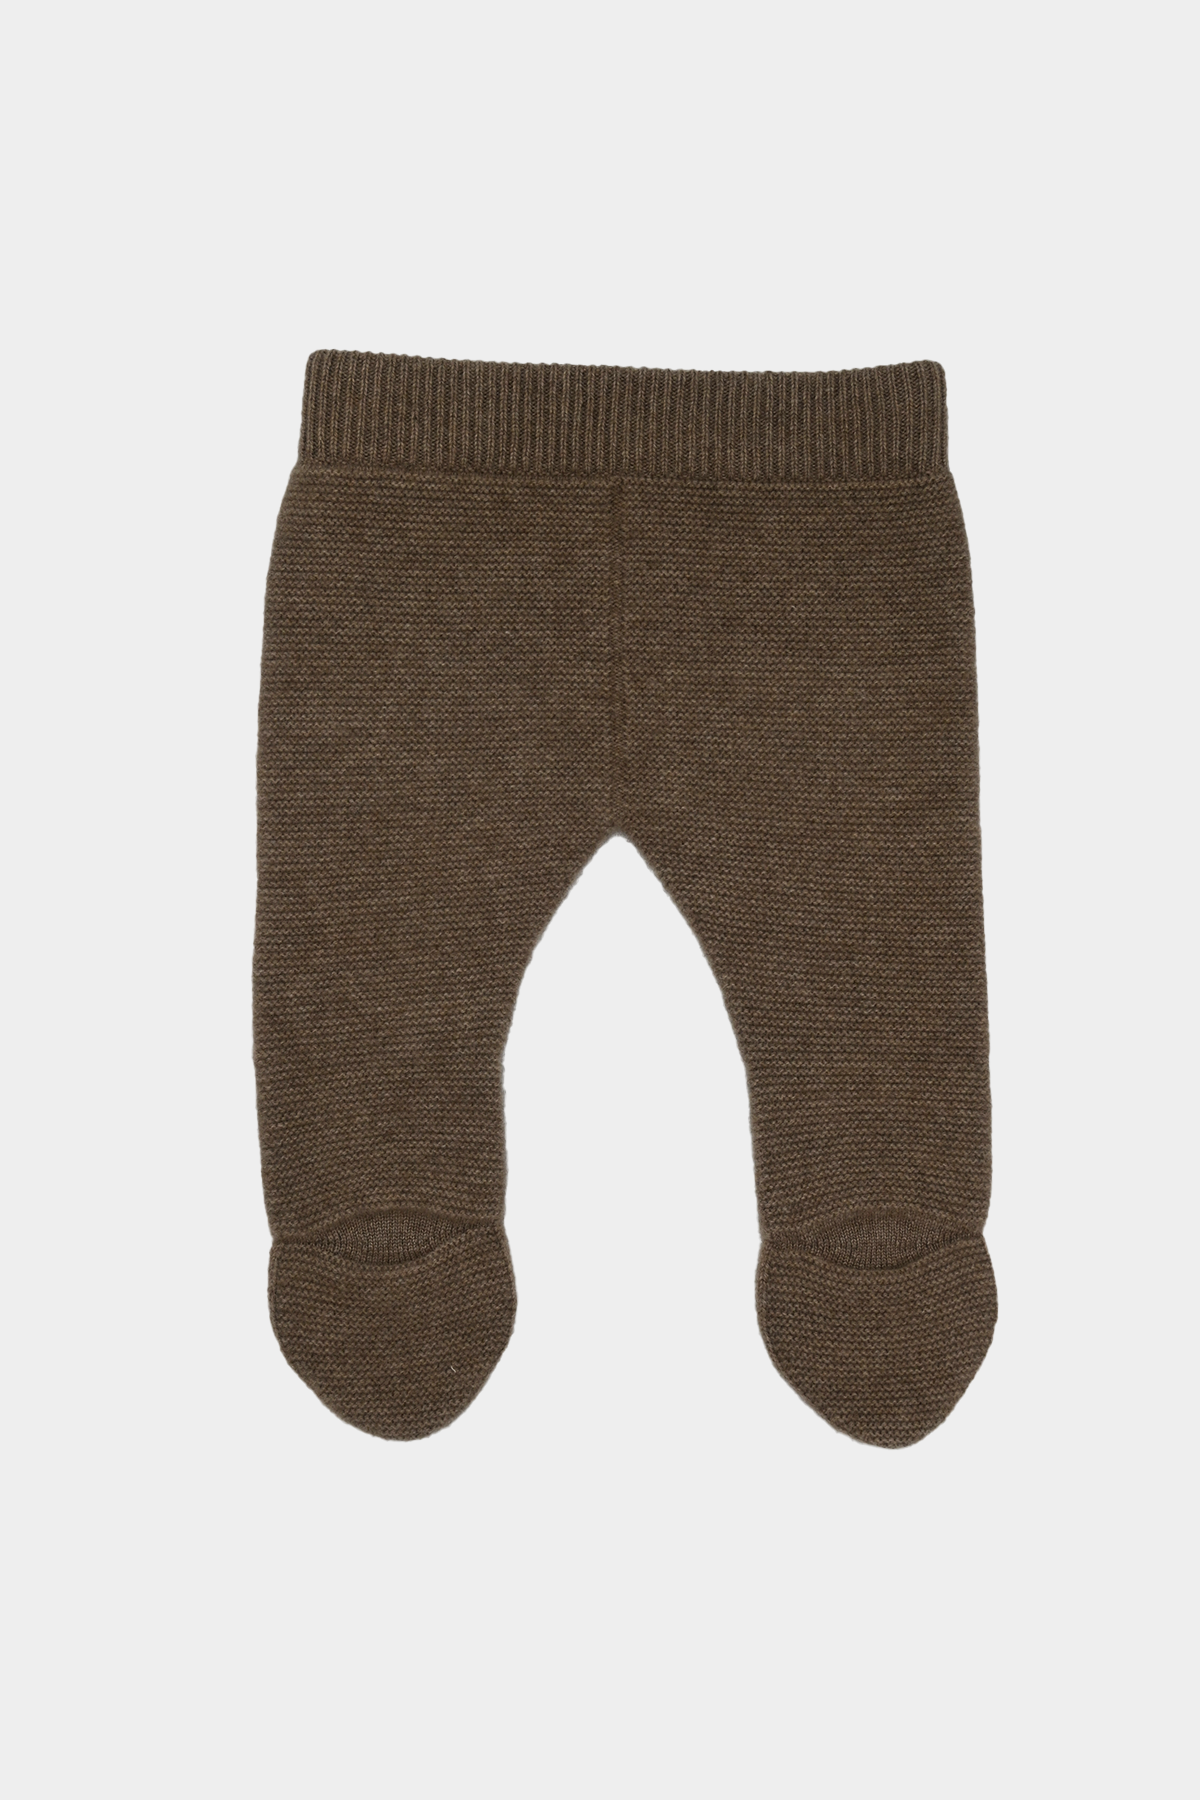 Double Layer Cashmere Baby Pants